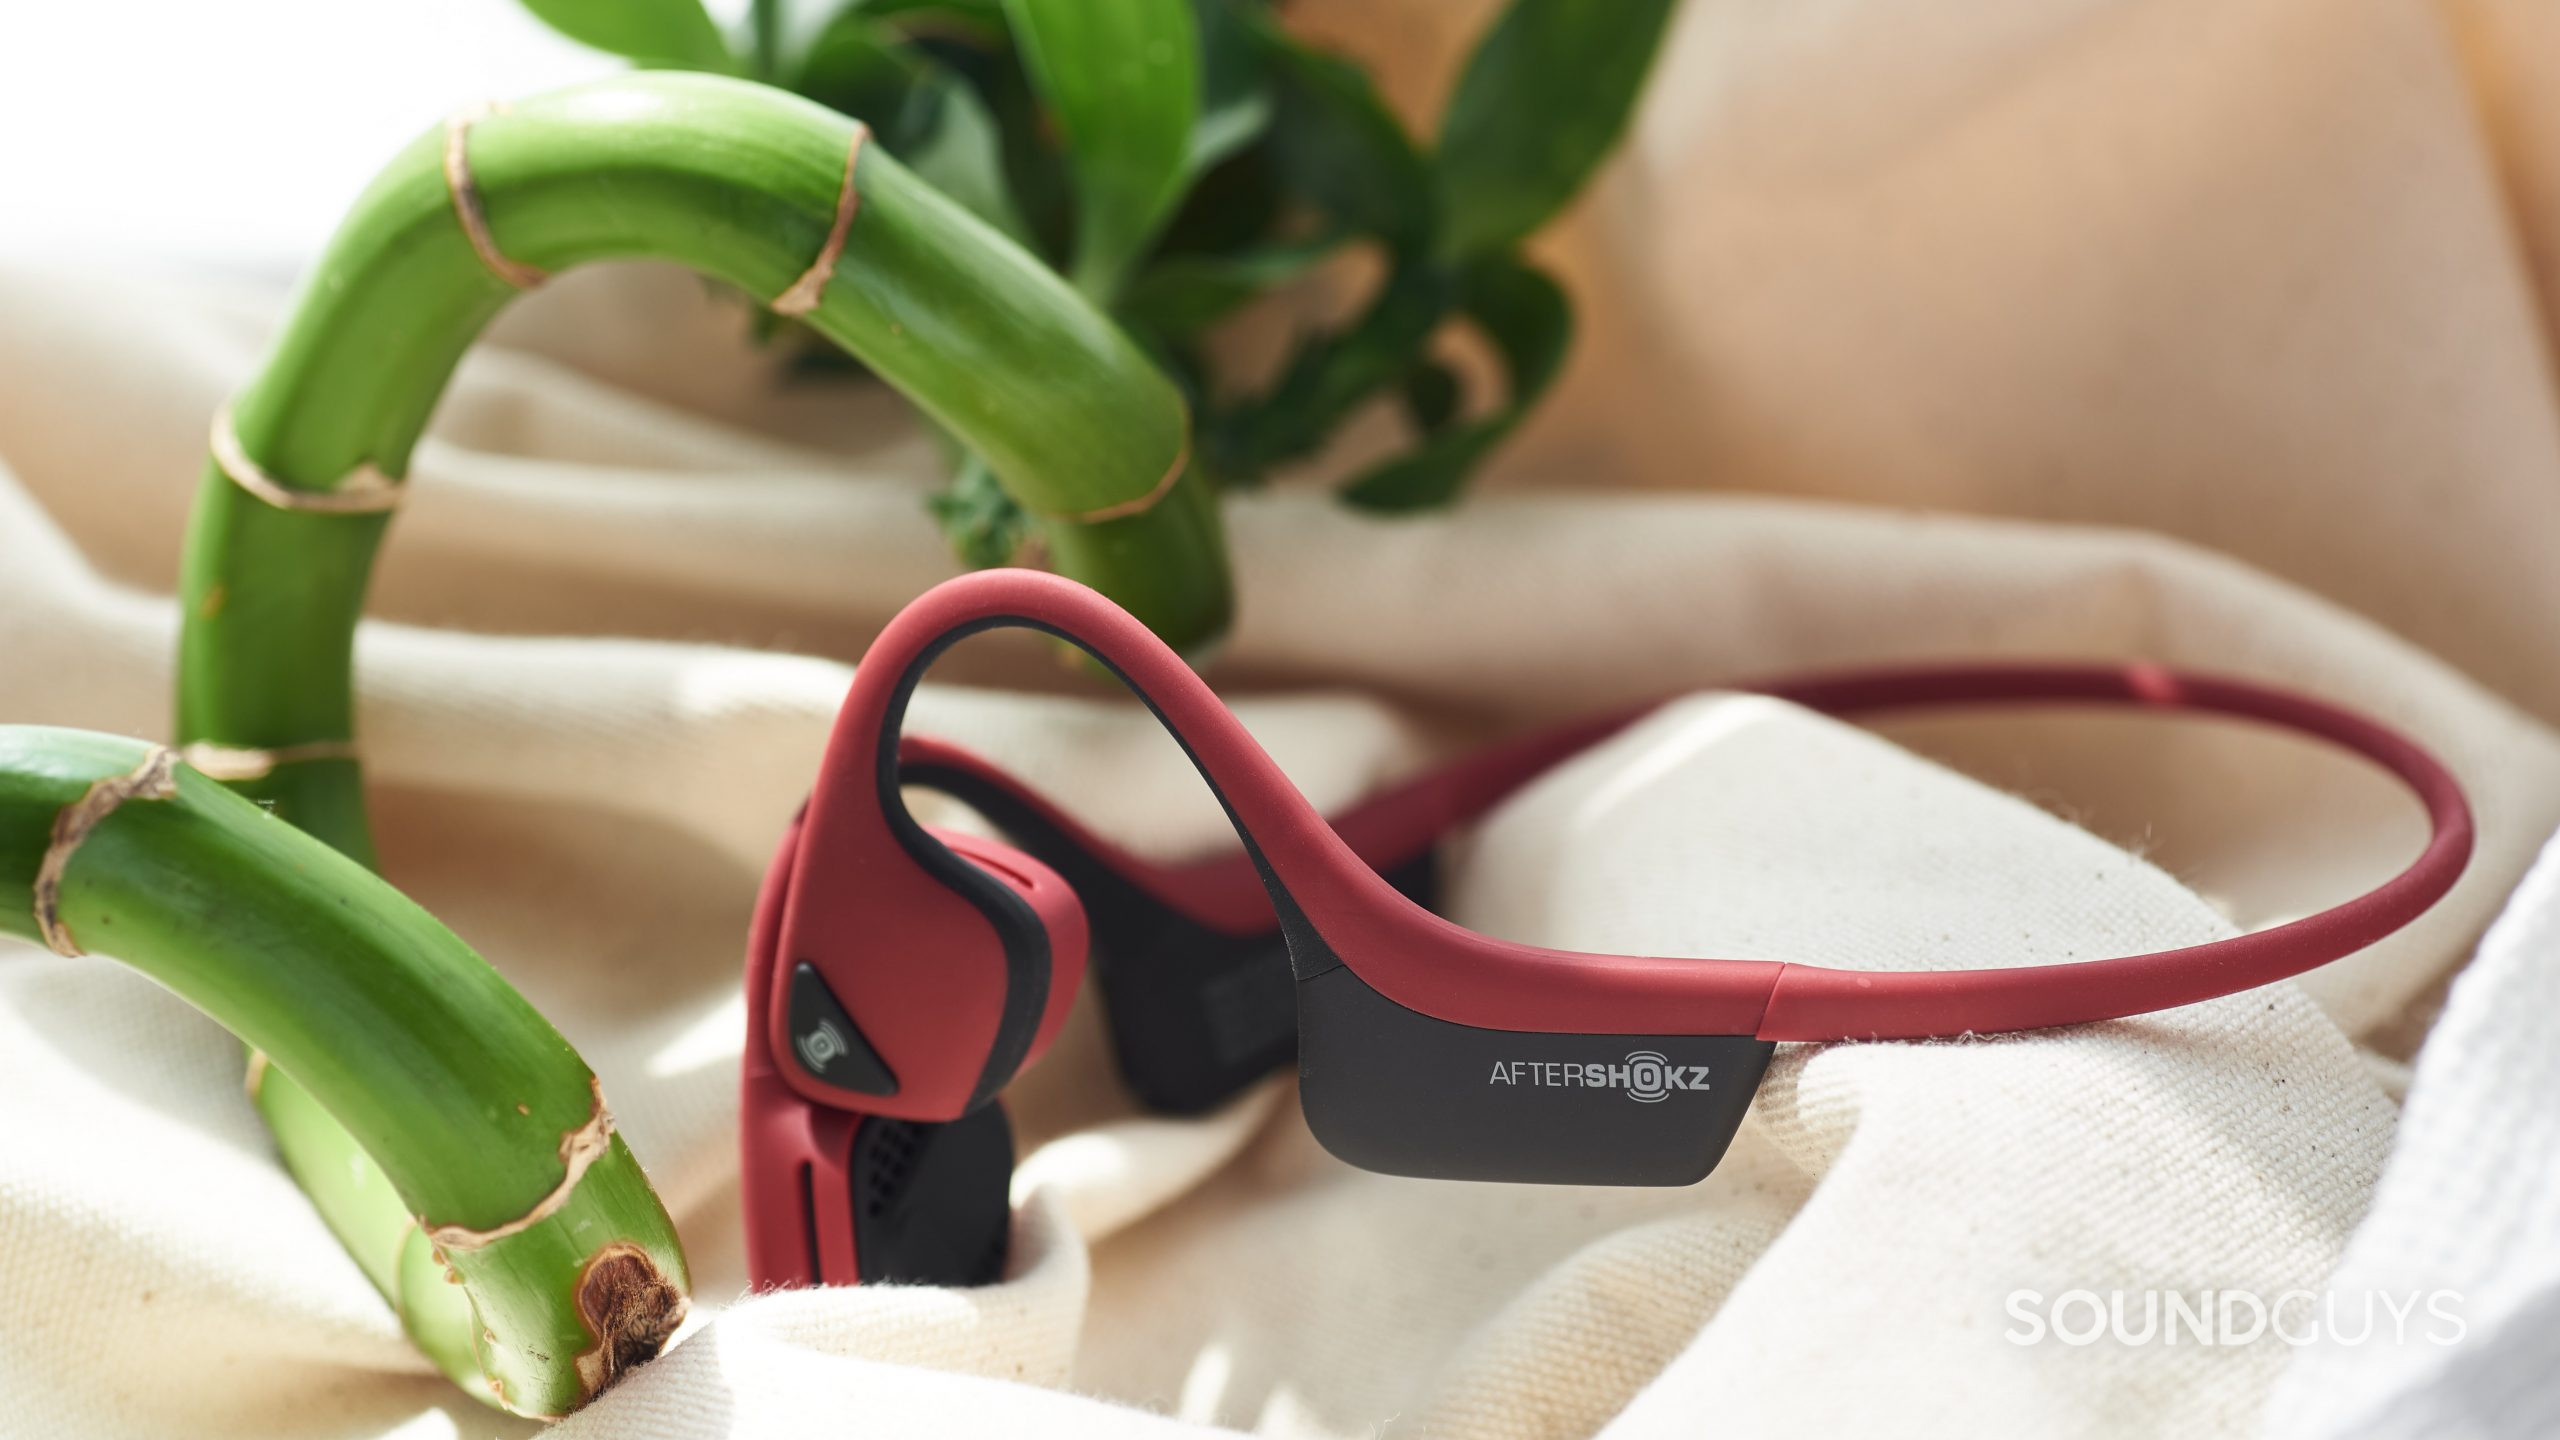 The AfterShokz Air bone conduction headphones lay on a cloth surface next to a bamboo stick.